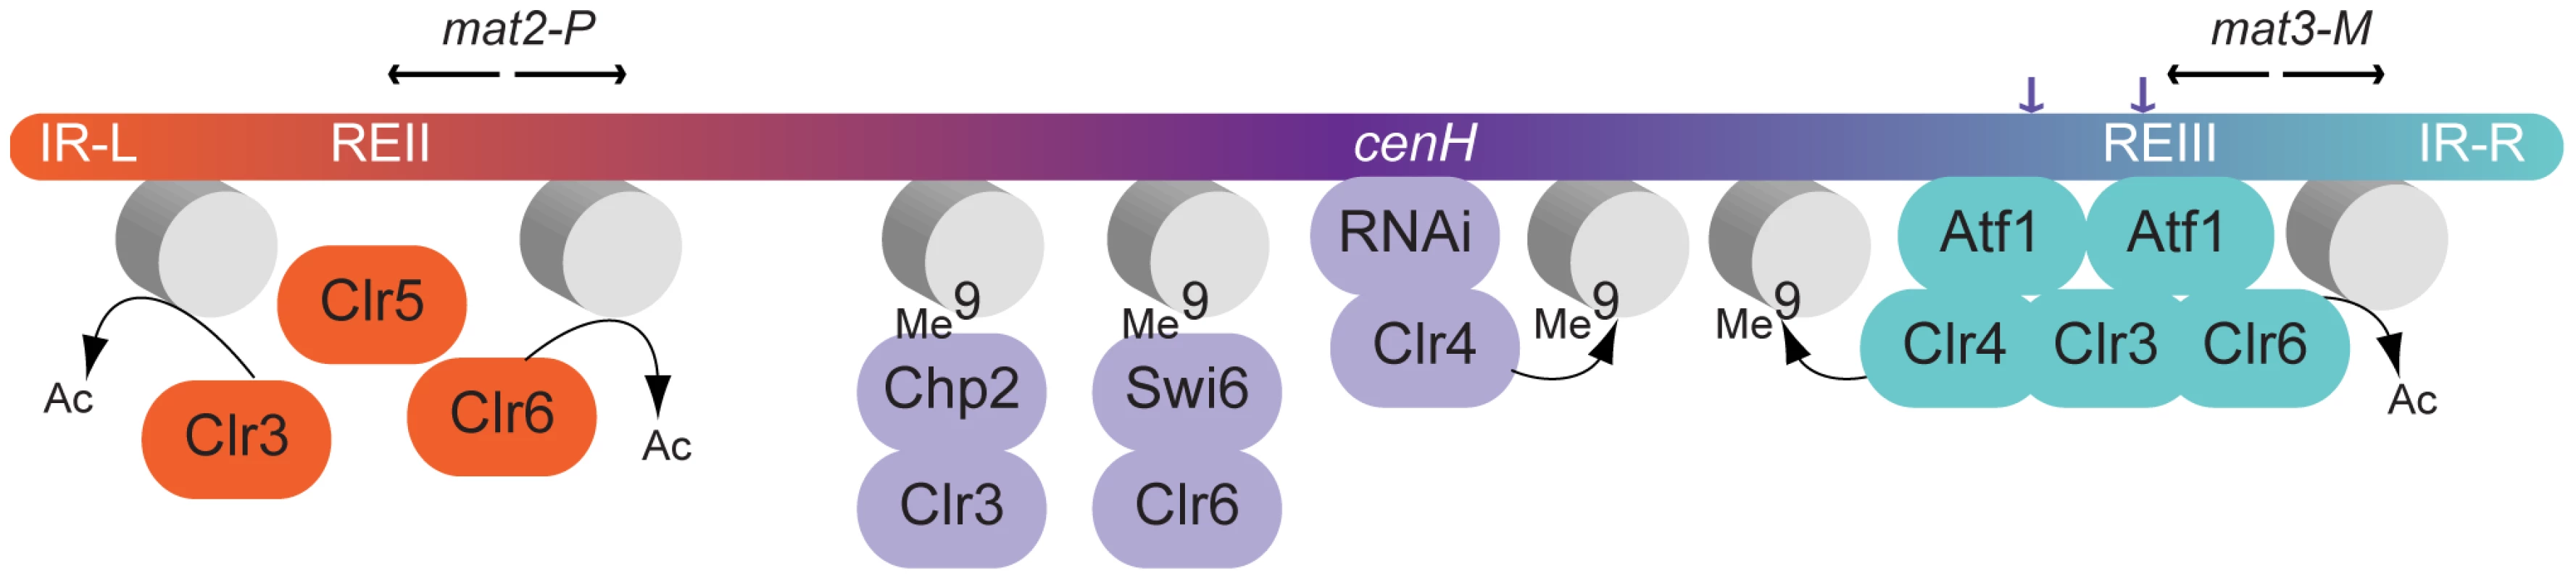 Model for gene silencing in the mating-type region.